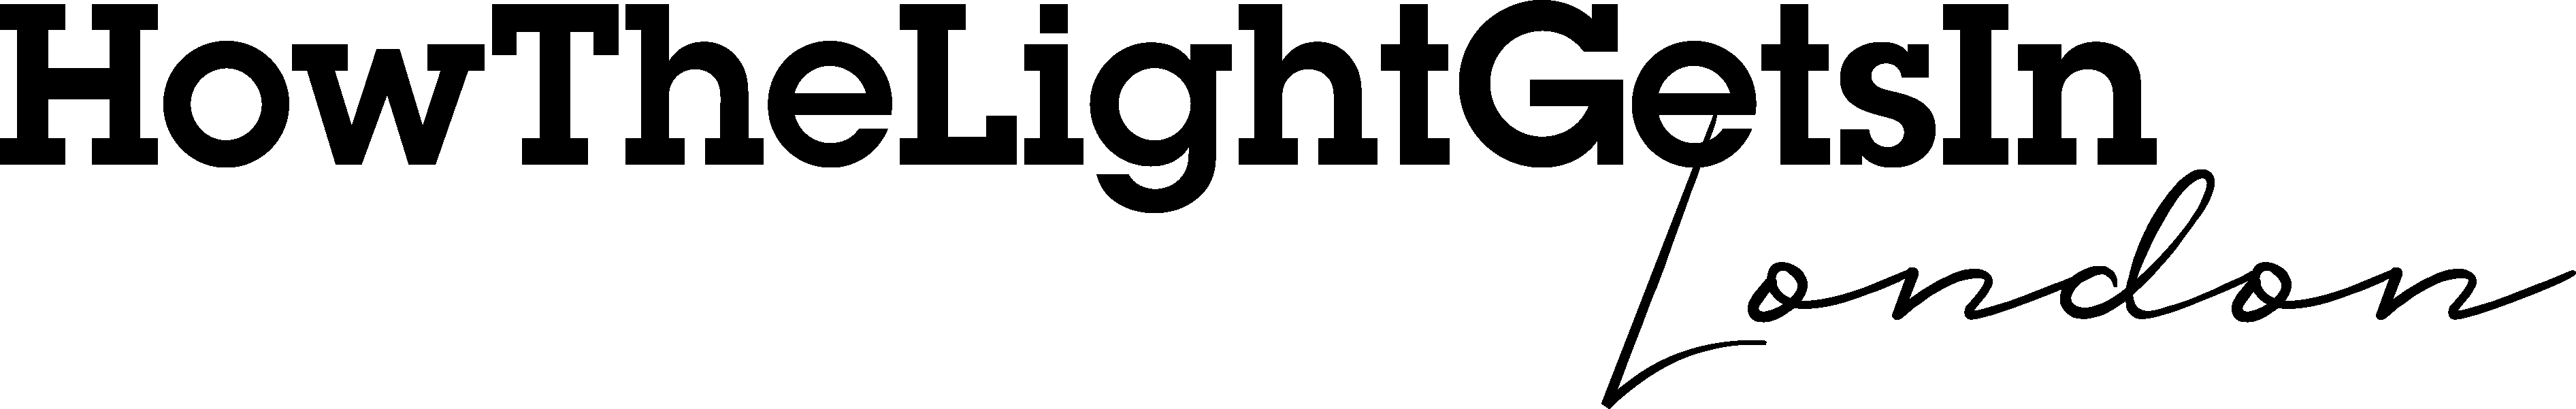 How the Light Gets in London 2019 Logo